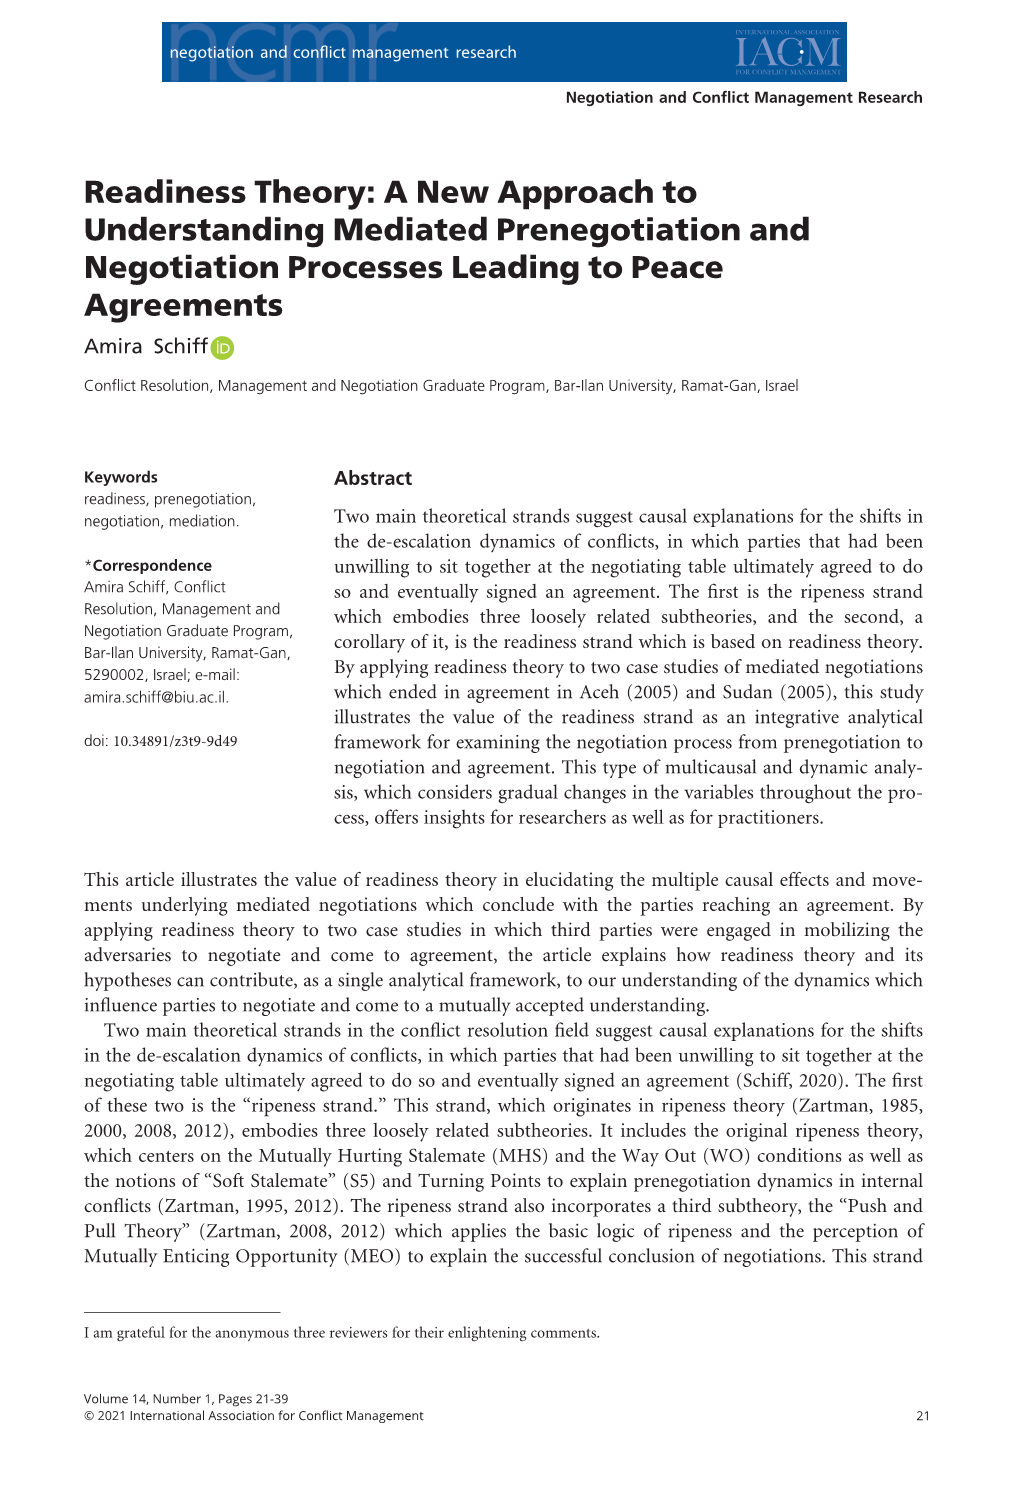 Readiness Theory: a New Approach to Understanding Mediated Prenegotiation and Negotiation Processes Leading to Peace Agreements Amira Schiff